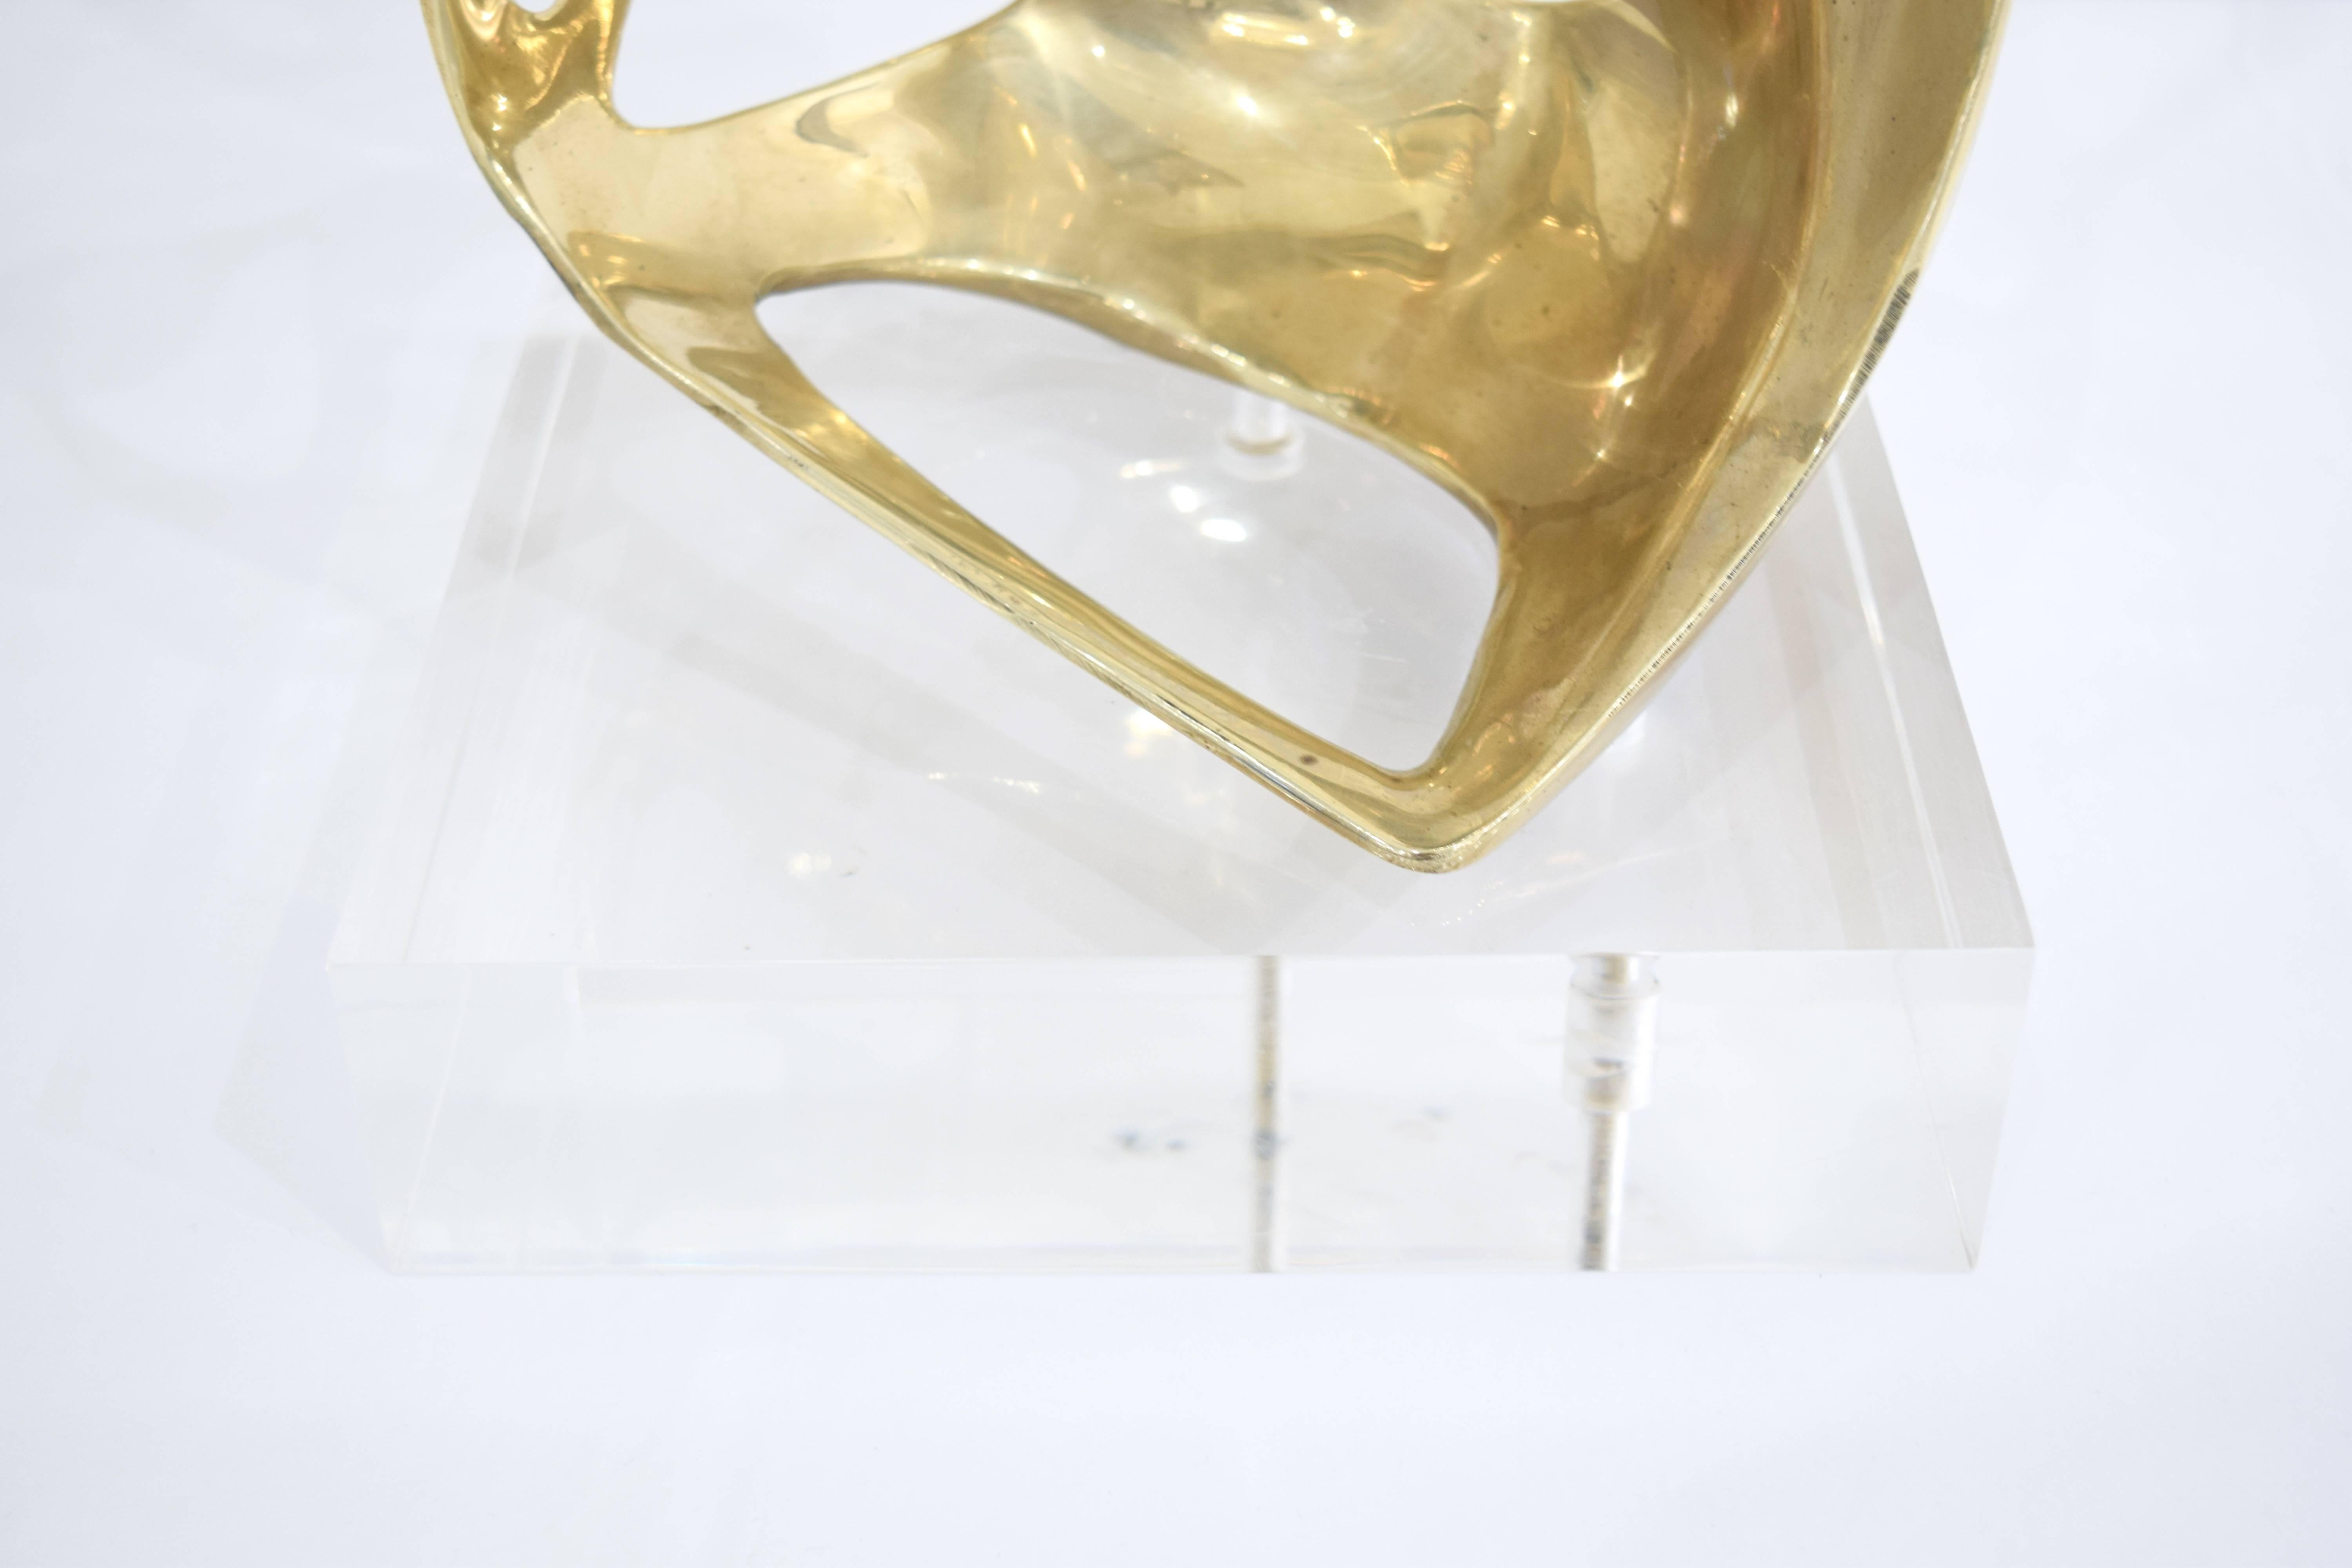 A Mid-Century Modern Lucite and brass abstract sculpture in the form of a human like depiction.